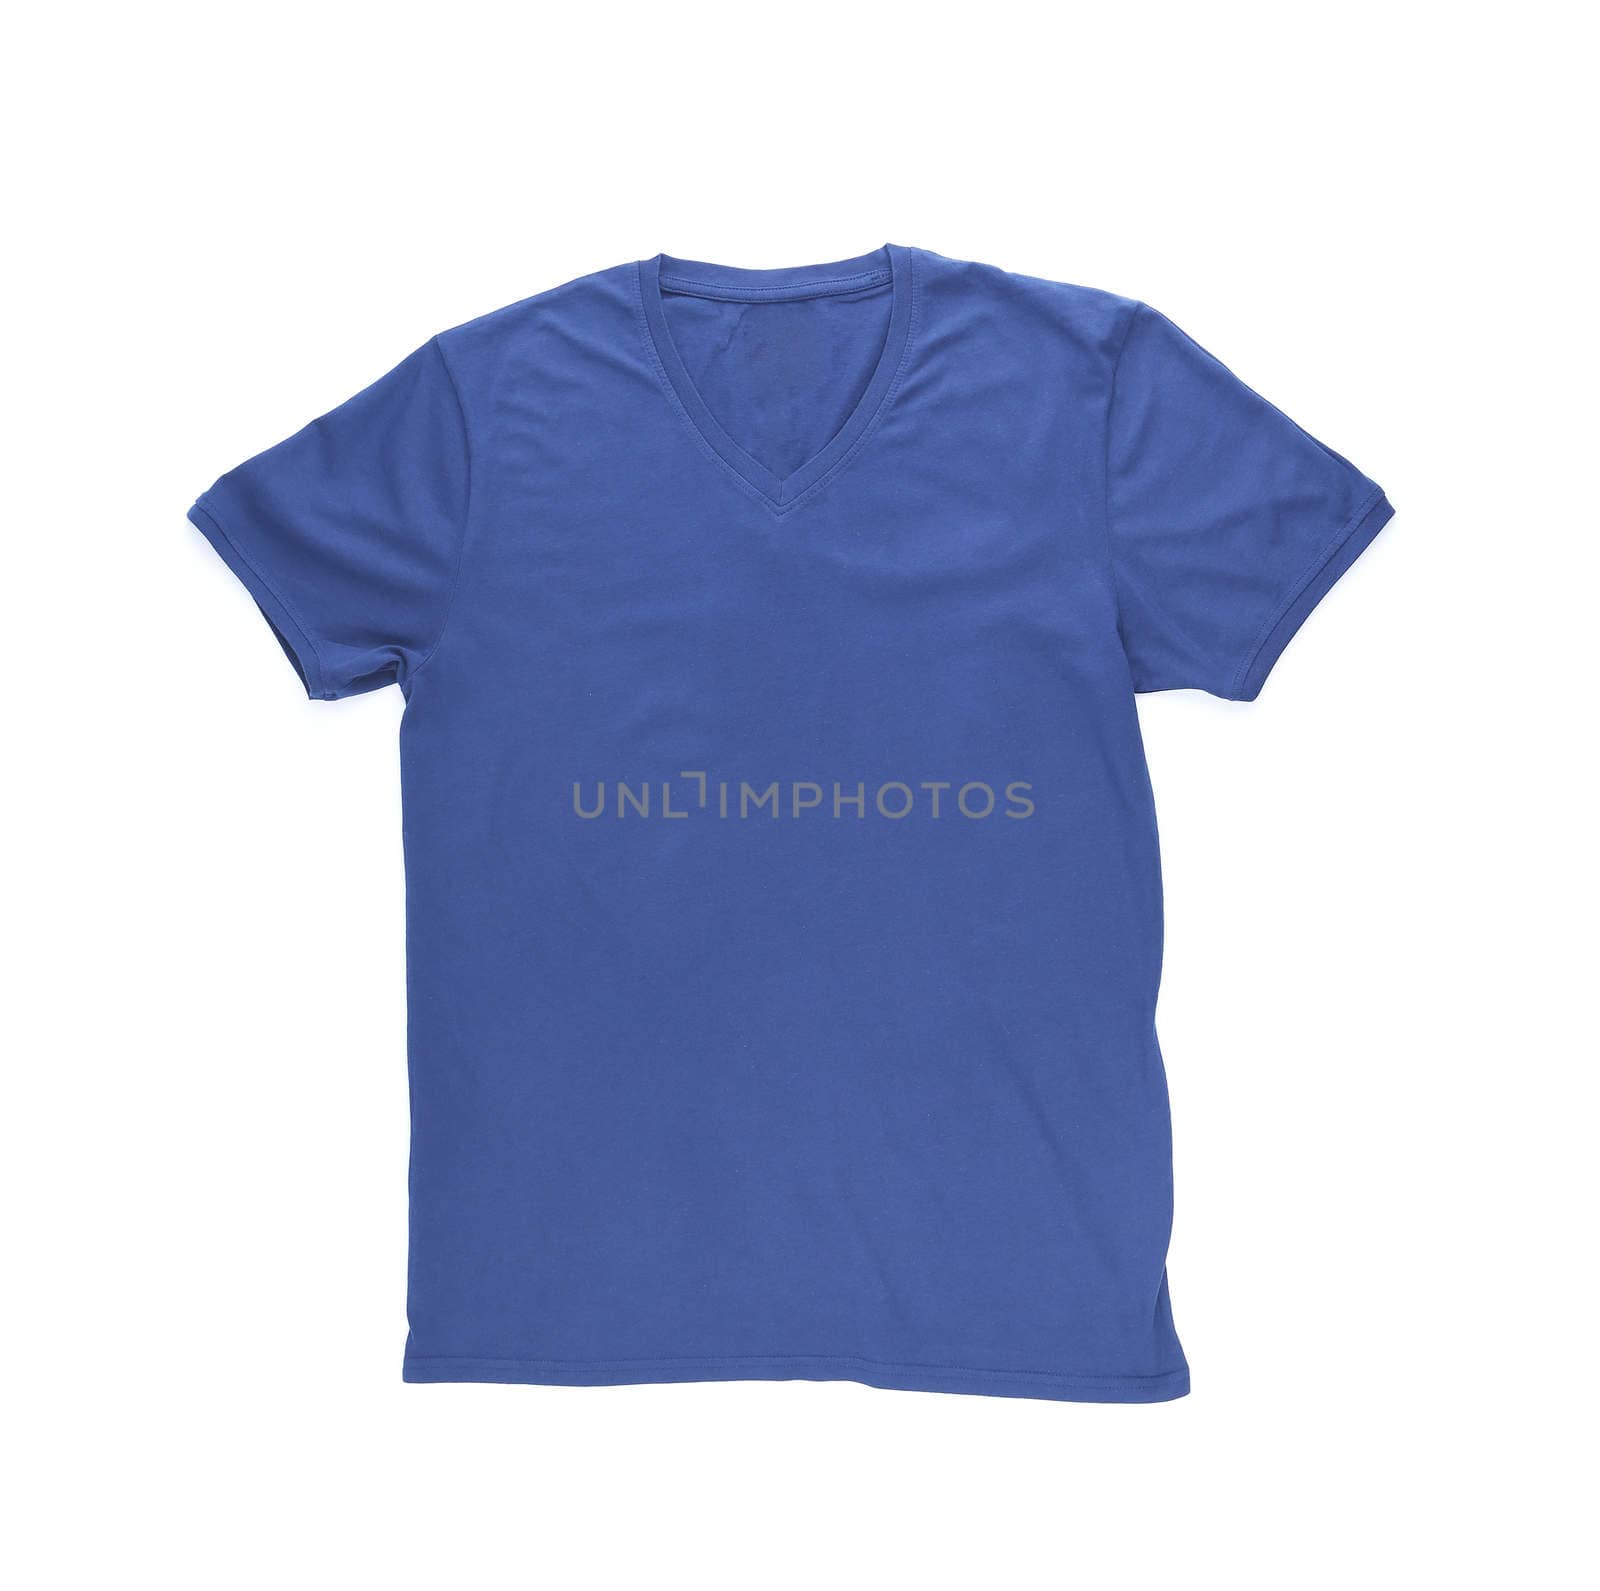 Men's blue T-shirt with clipping path on the white background.